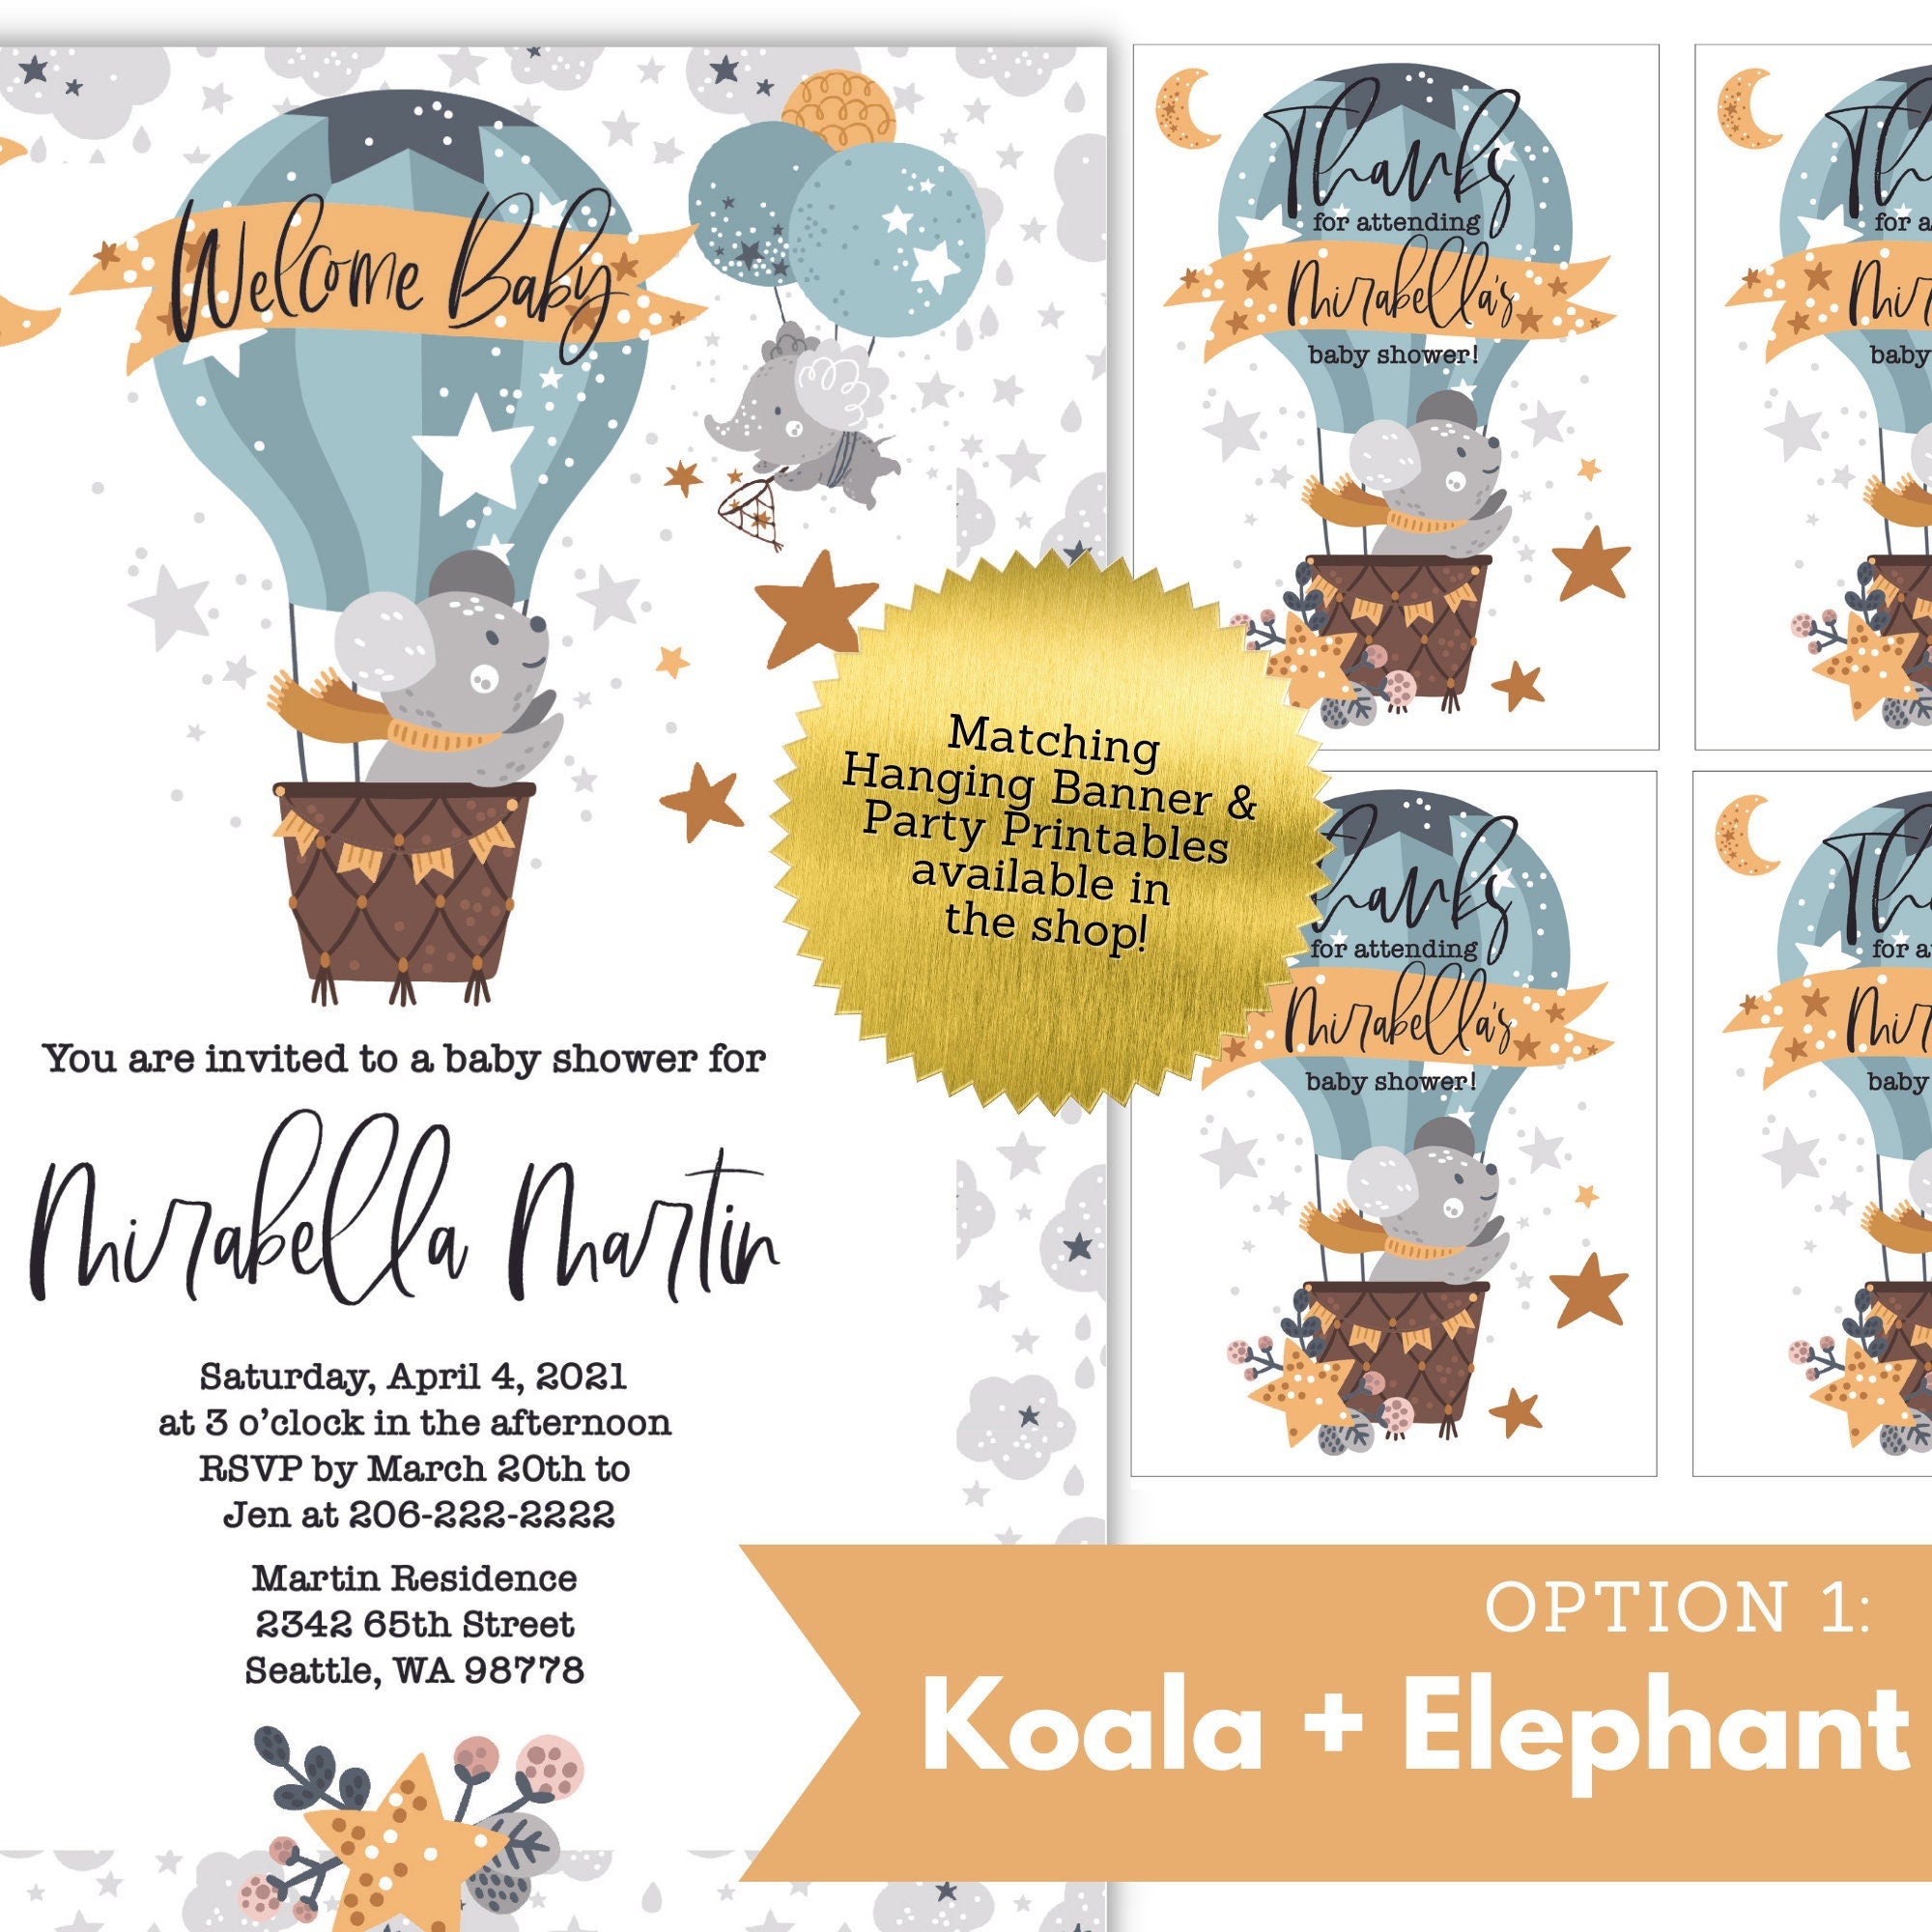 Printable Baby Shower Invitation & Favor Gift Tag - Hot Air Balloon, Gender Neutral